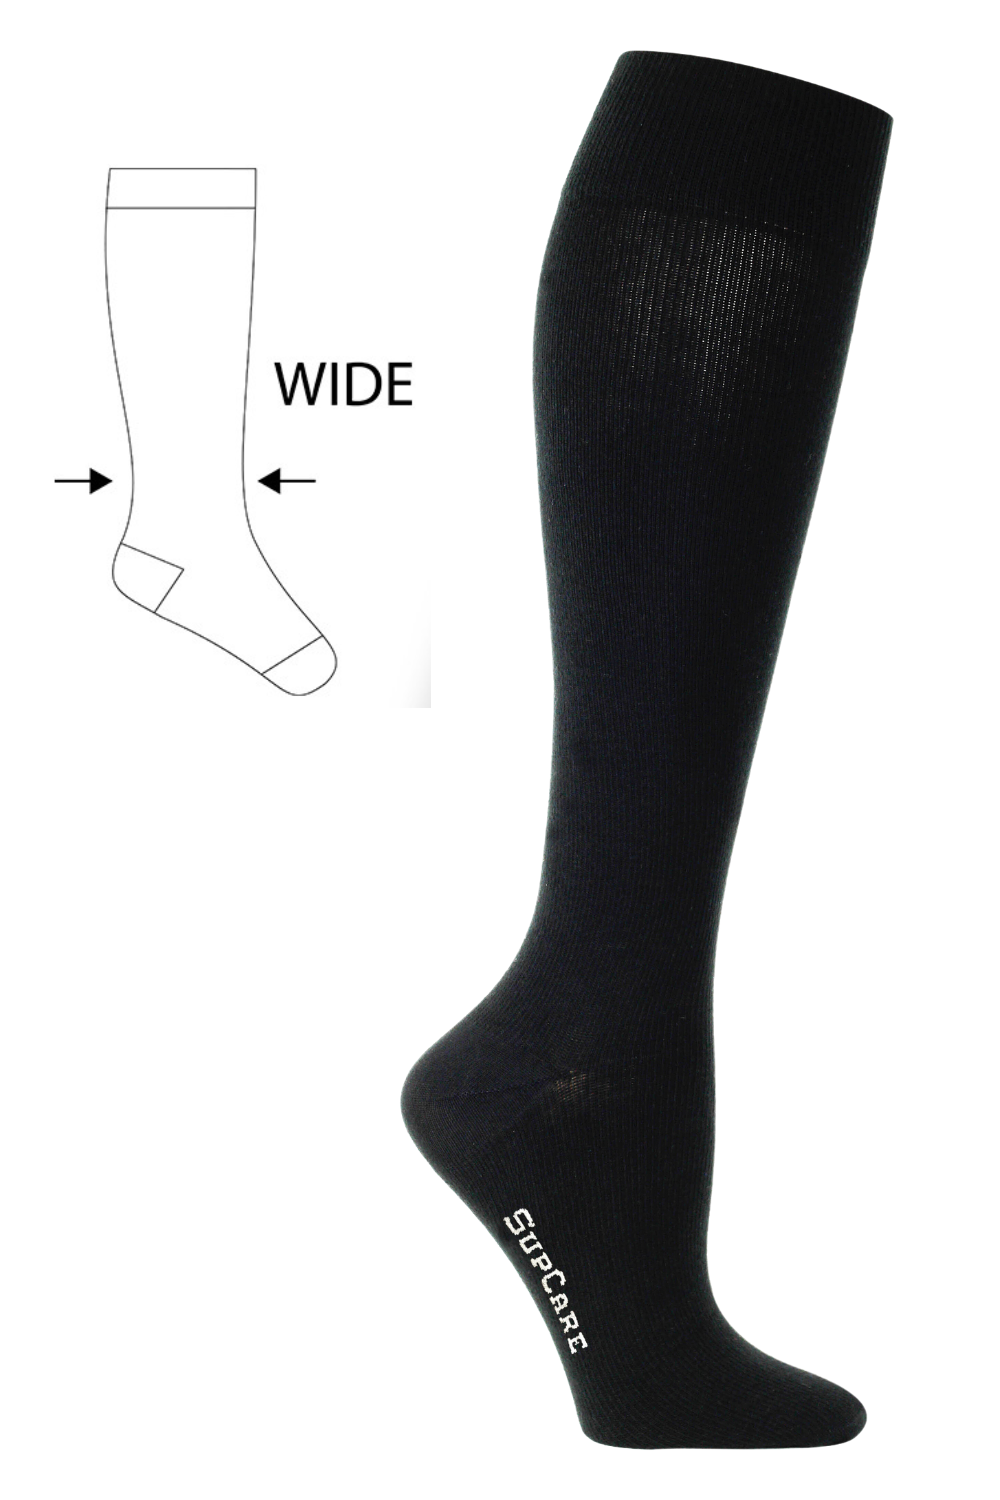 Compression socks Canadian largest selection of compression stockings